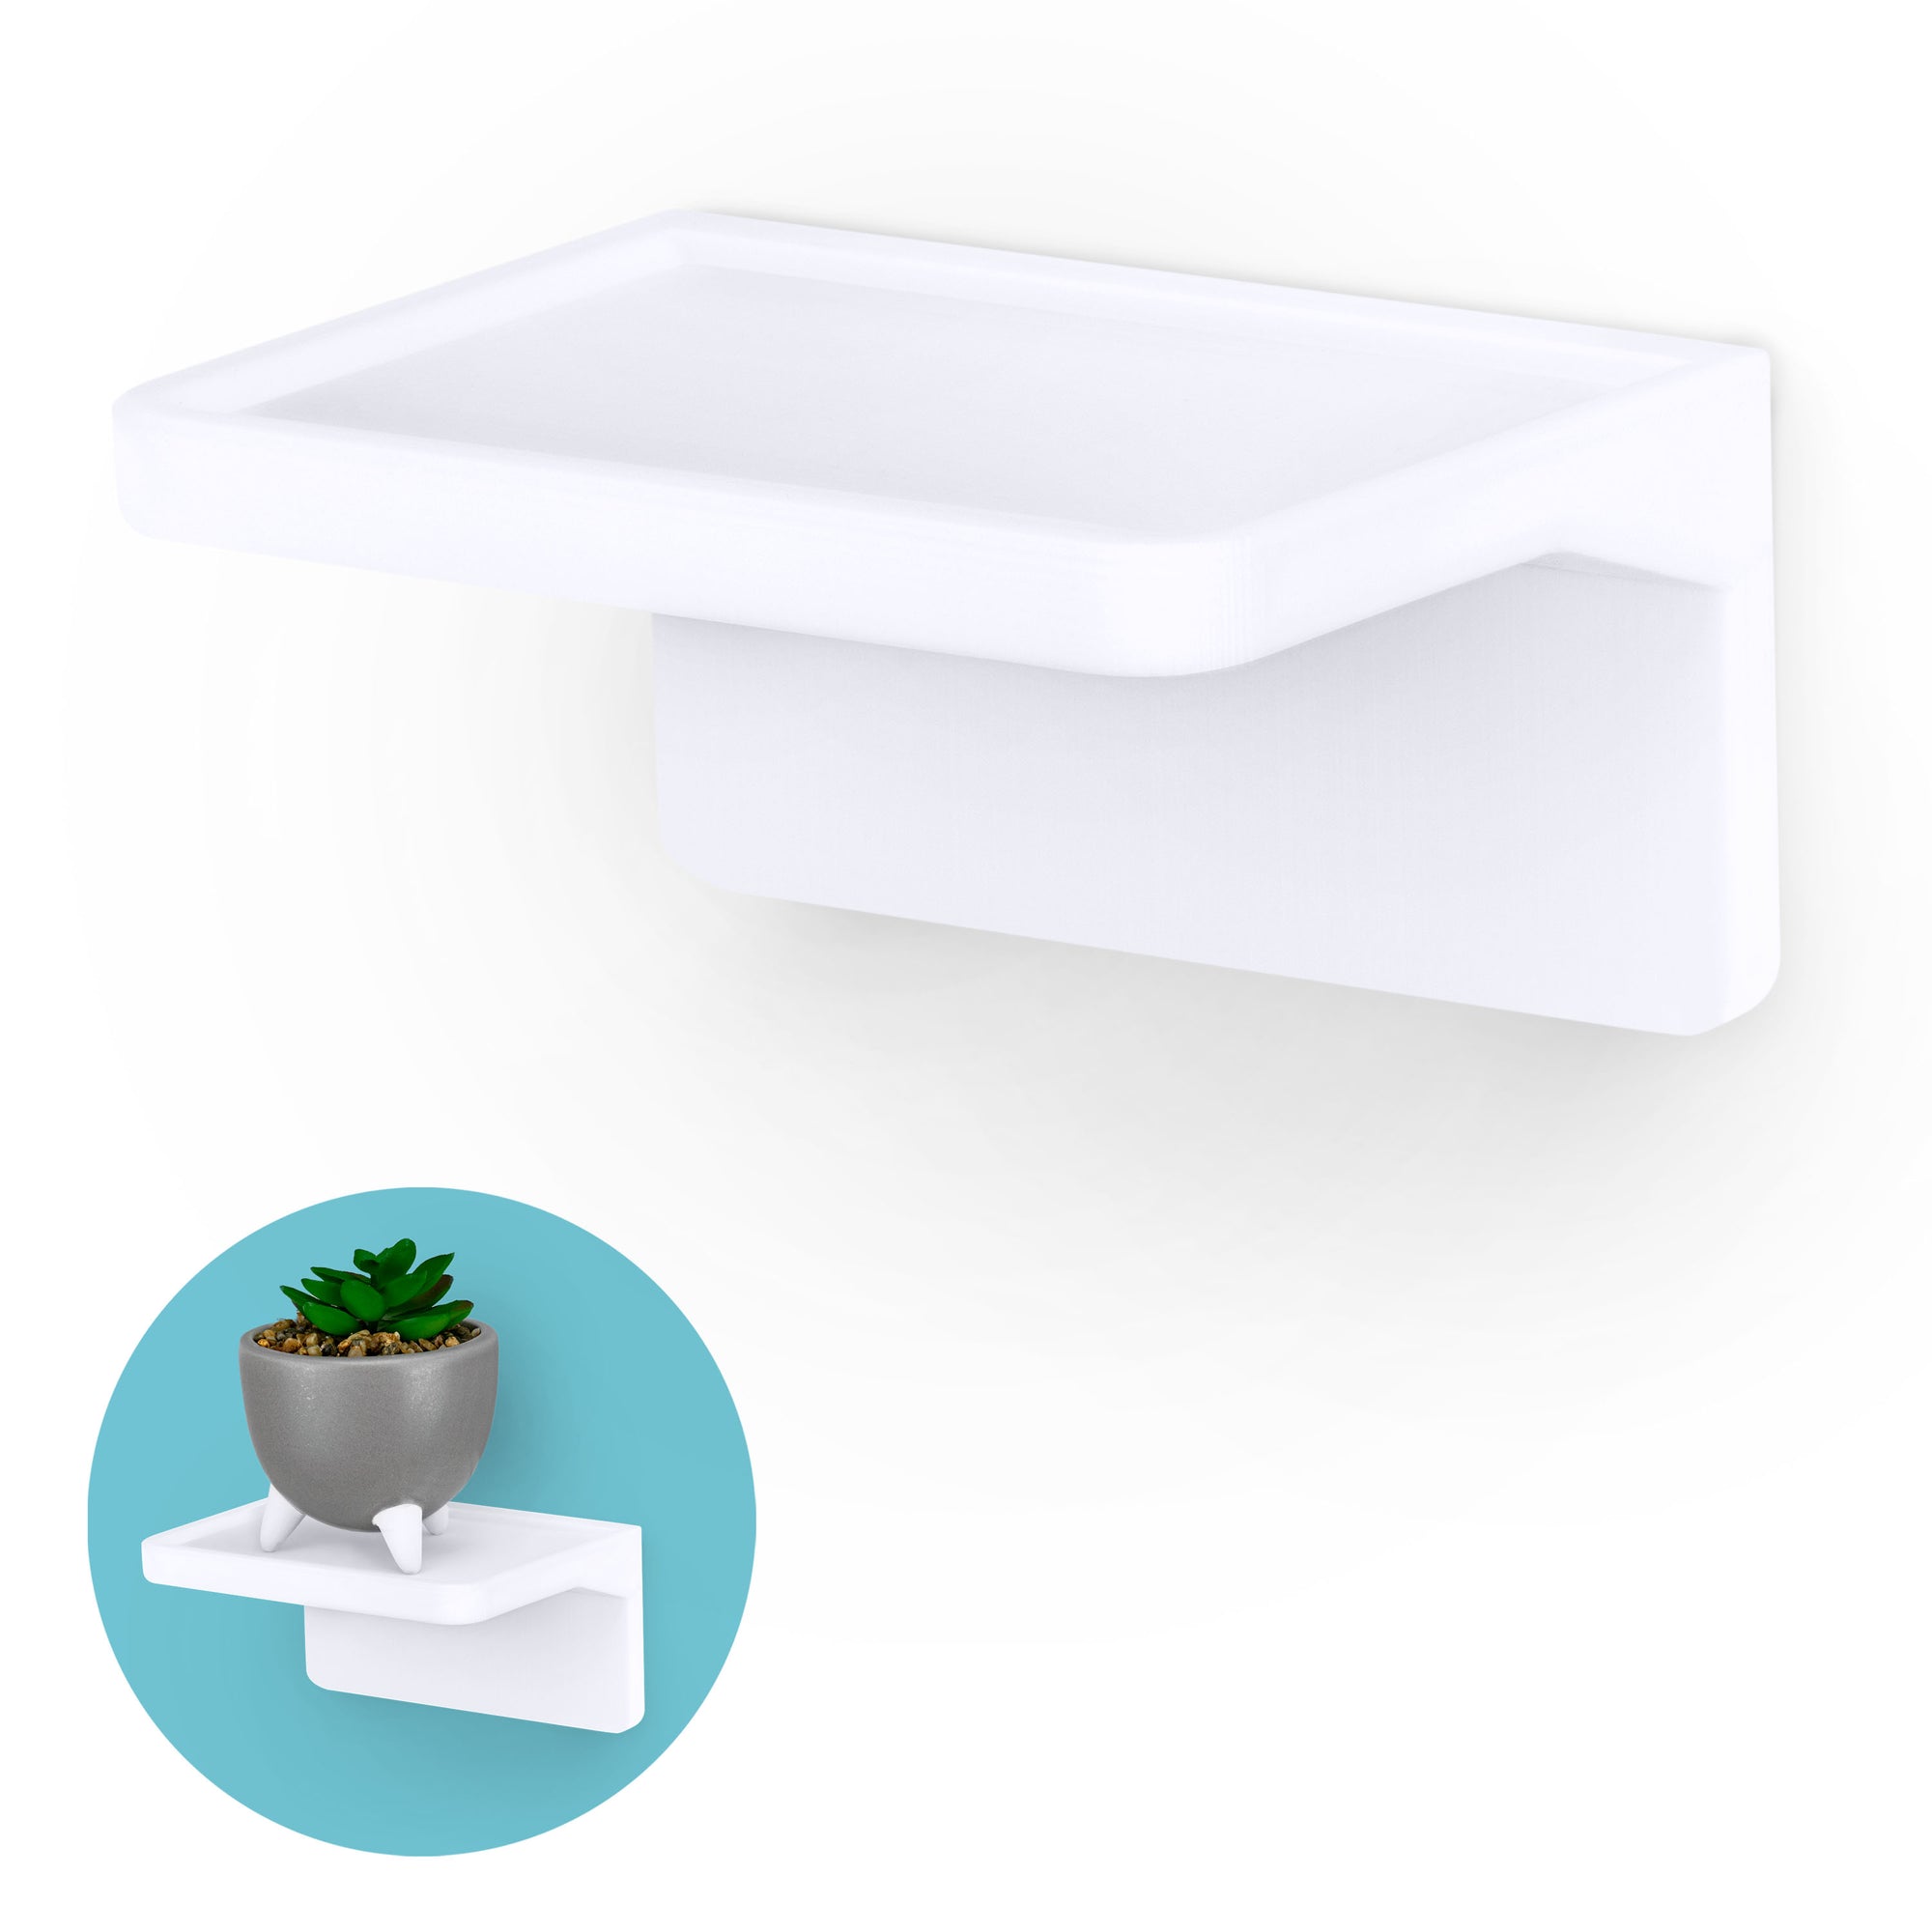 4.4" Adhesive Floating Shelf (UM155) for Cameras, Baby Monitors, Plants & More (113mm x 83mm / 4.4” x 3.2”)